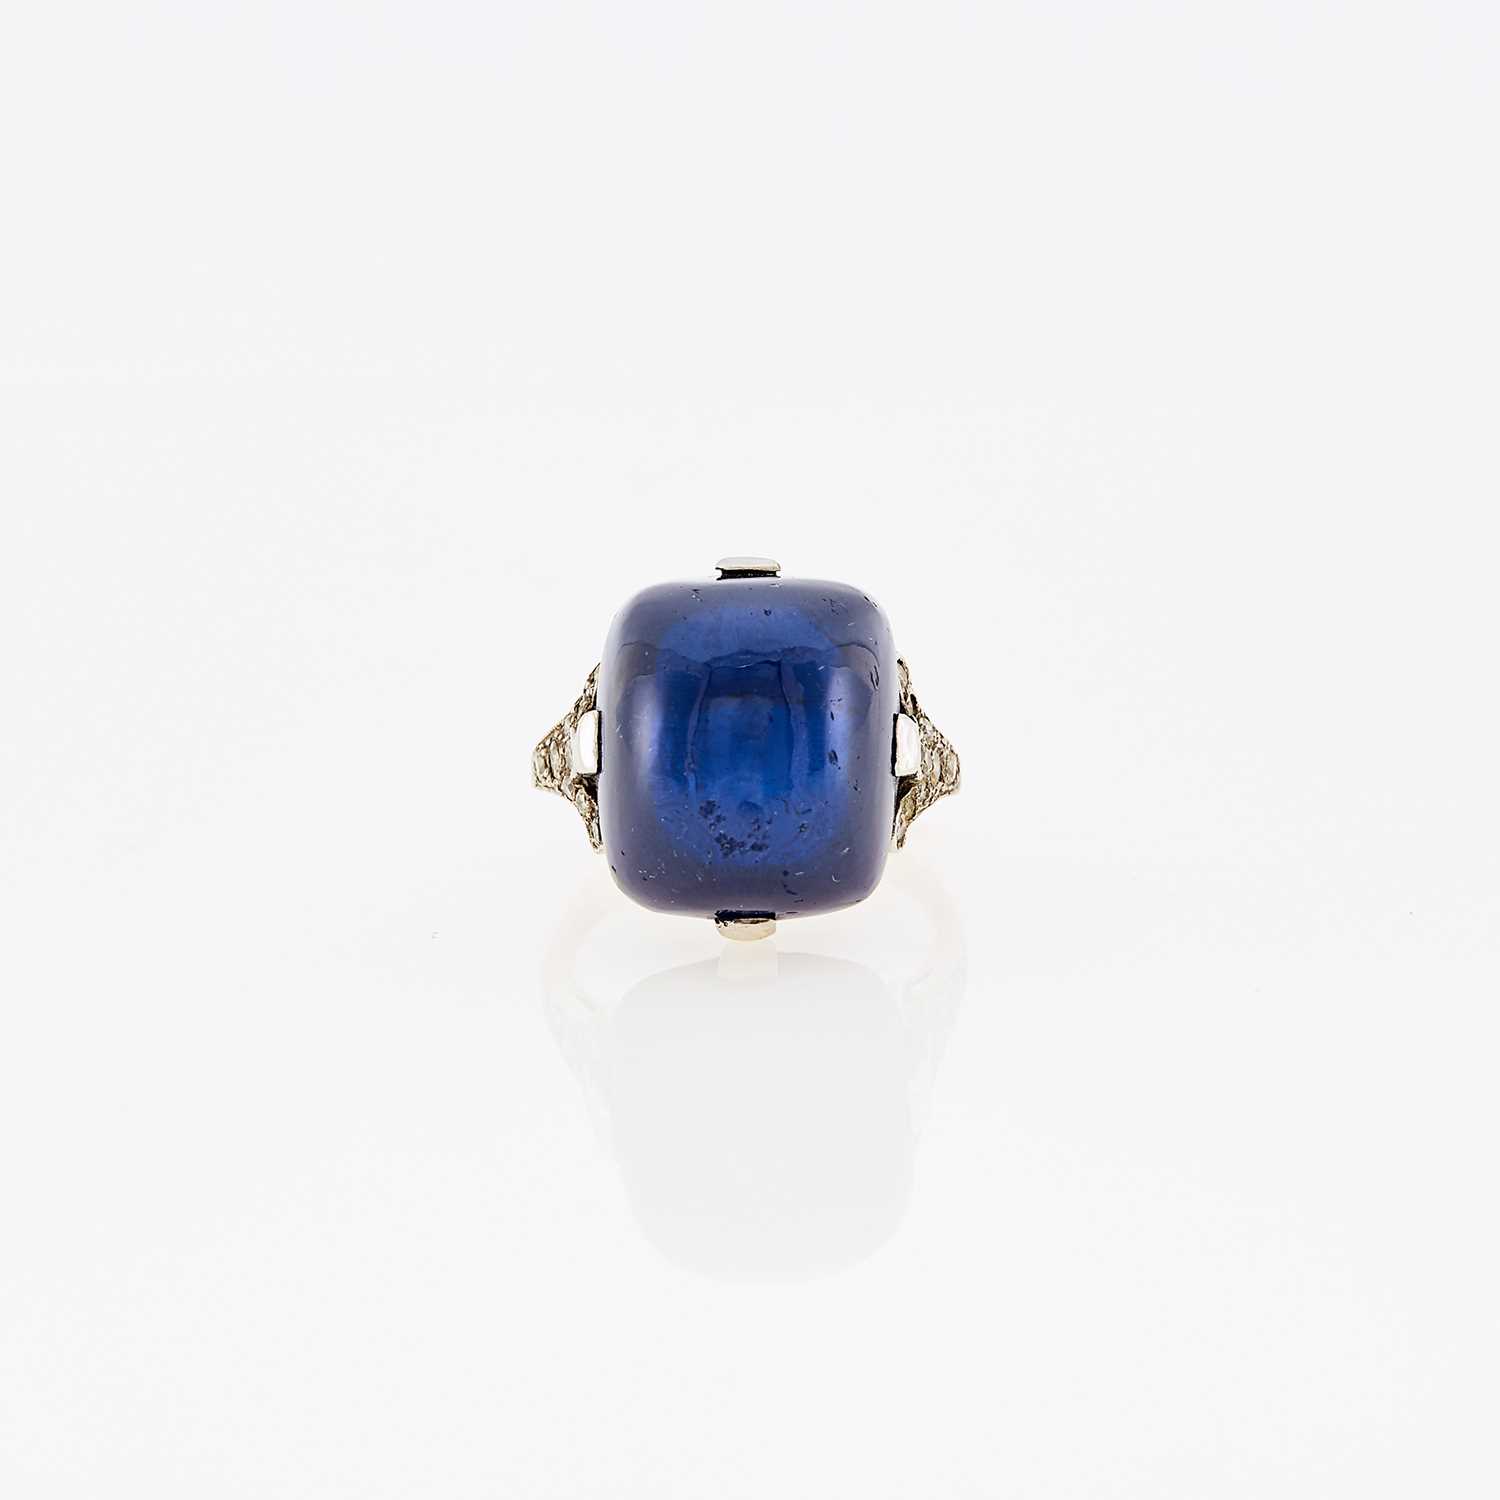 Lot 1078 - Platinum, Cabochon Synthetic Sapphire and Diamond Ring